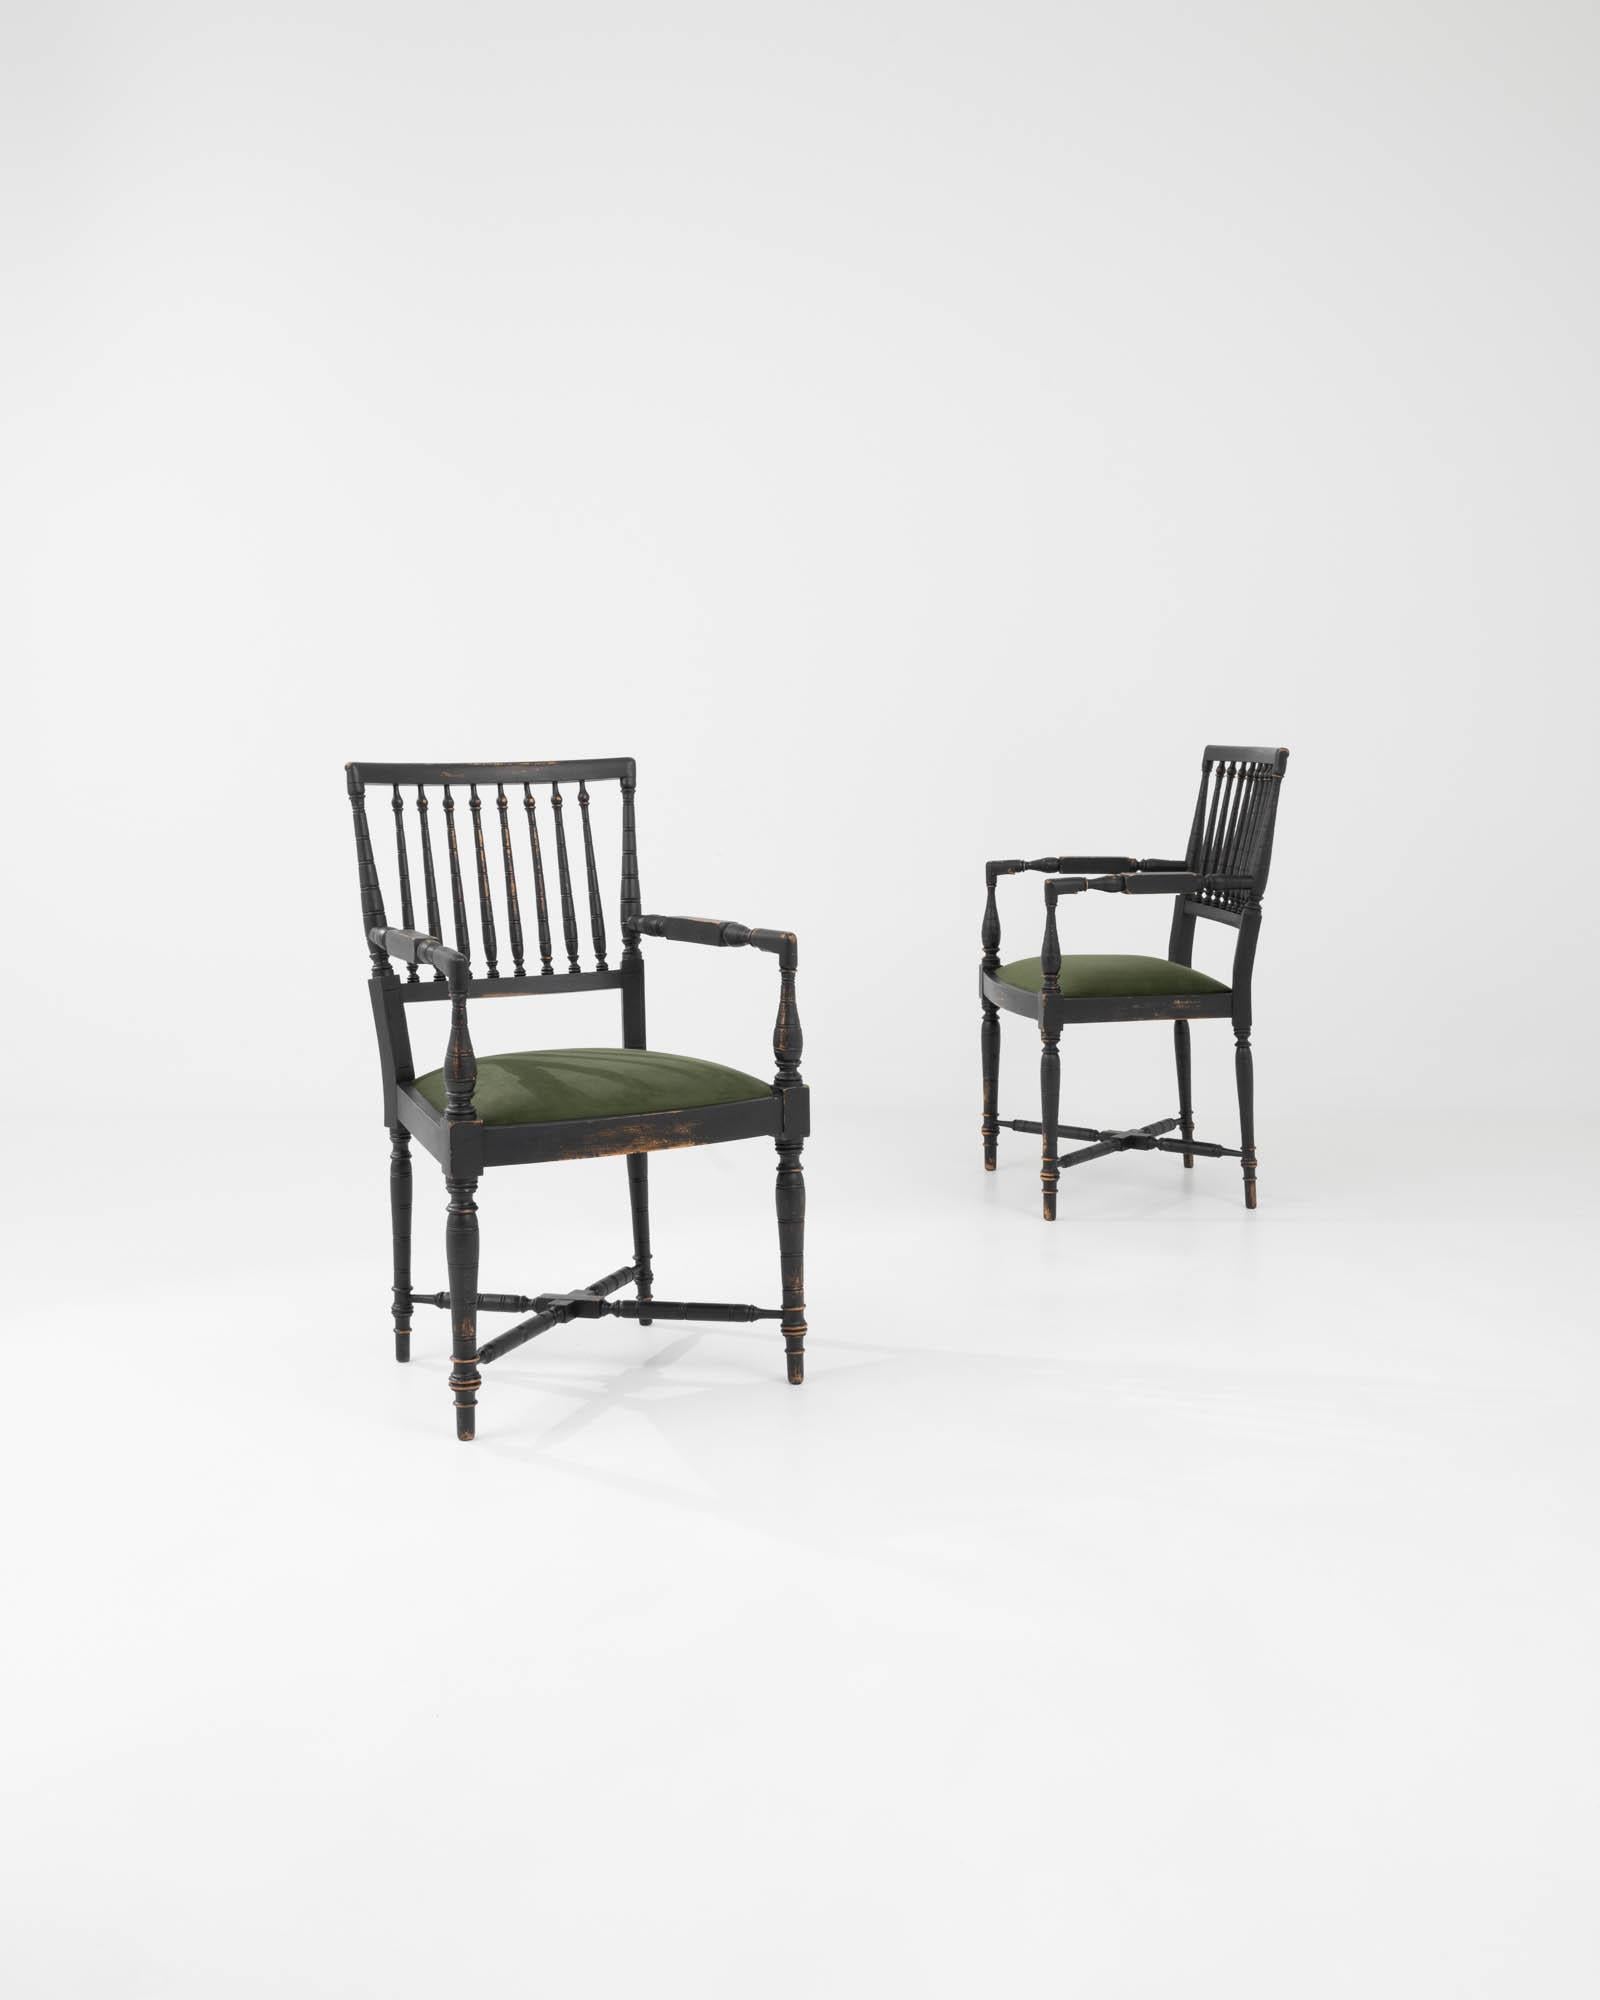 Made in France in the 20th Century, this pair of side chairs is constructed from lathed wooden elements, and re-upholstered with a velvety green fabric. The black finish, devoid of color, serves to highlight the form of the carving. The shapes